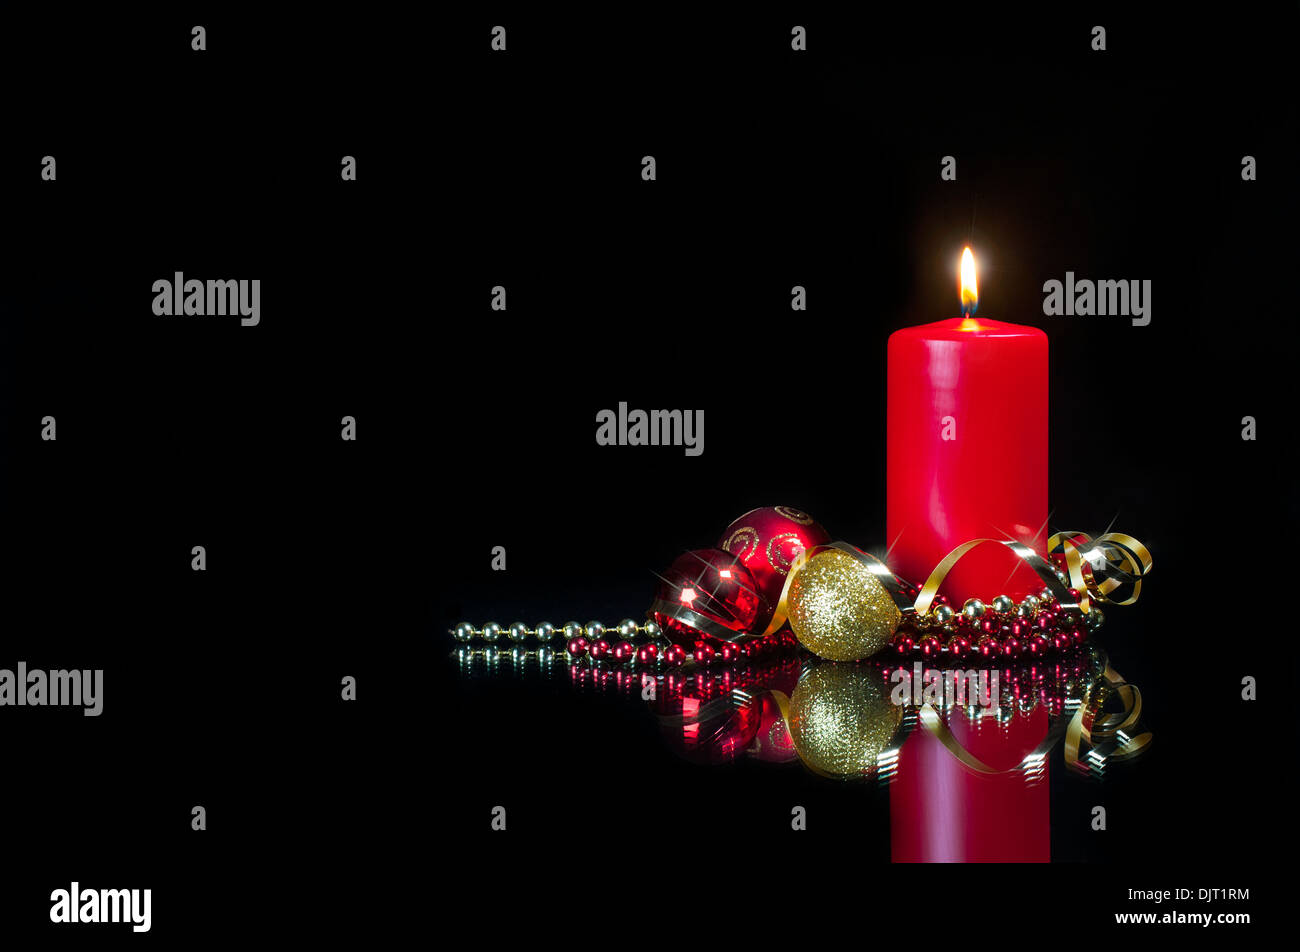 Christmas card picture - red candle and decorations Stock Photo